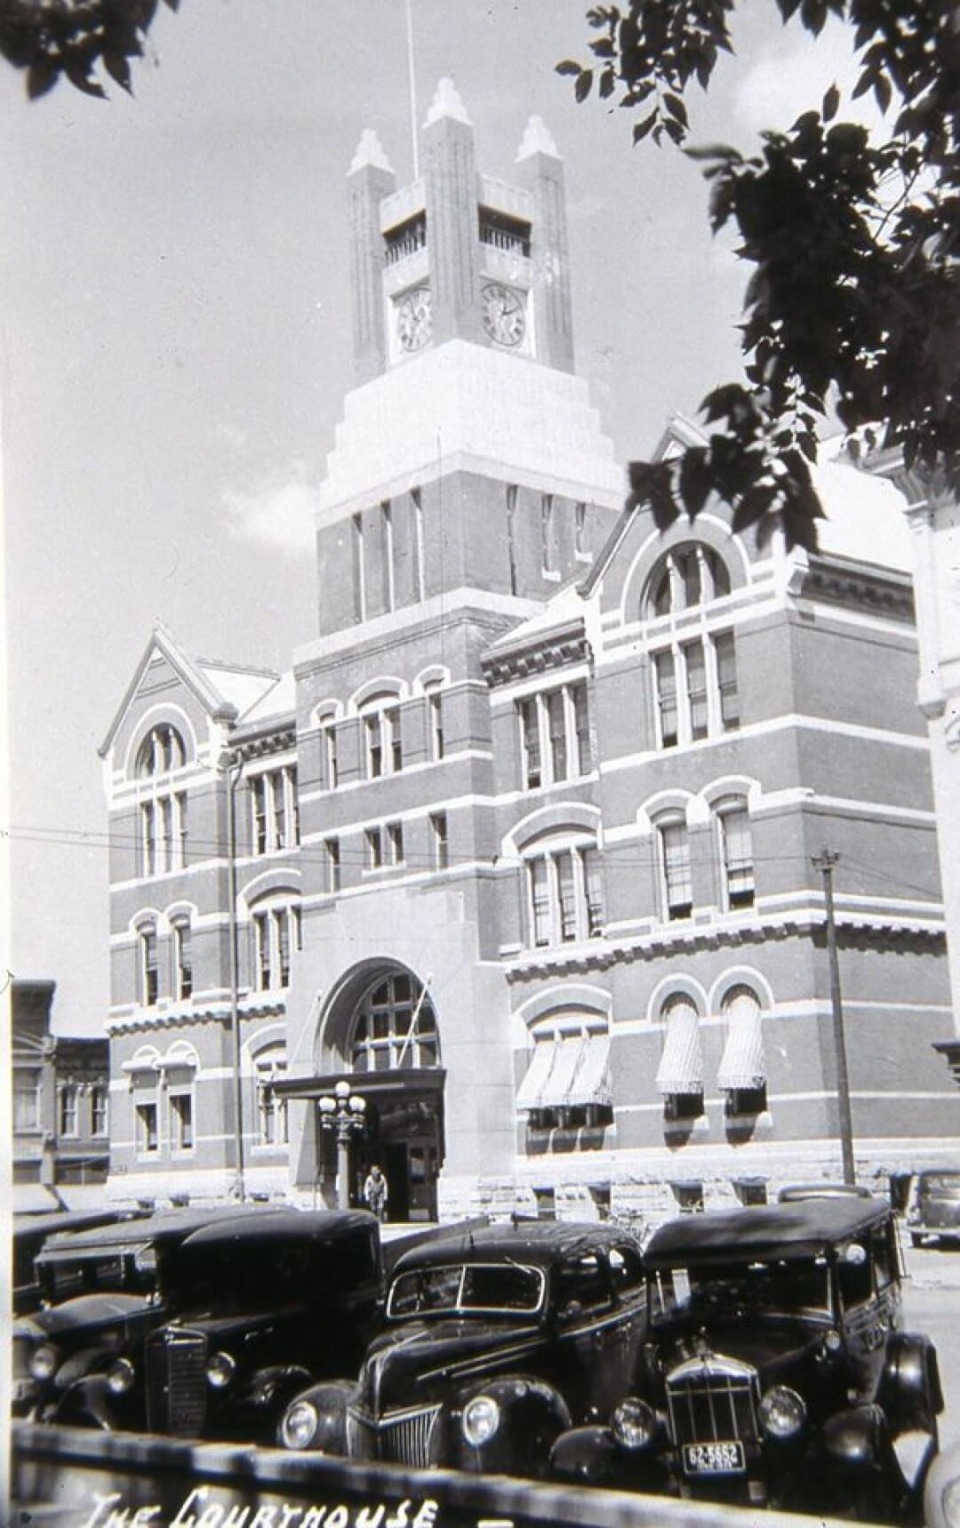 The Mahaska County Courthouse and 1930s vehicles parked outside of it after its 1934 renovations.